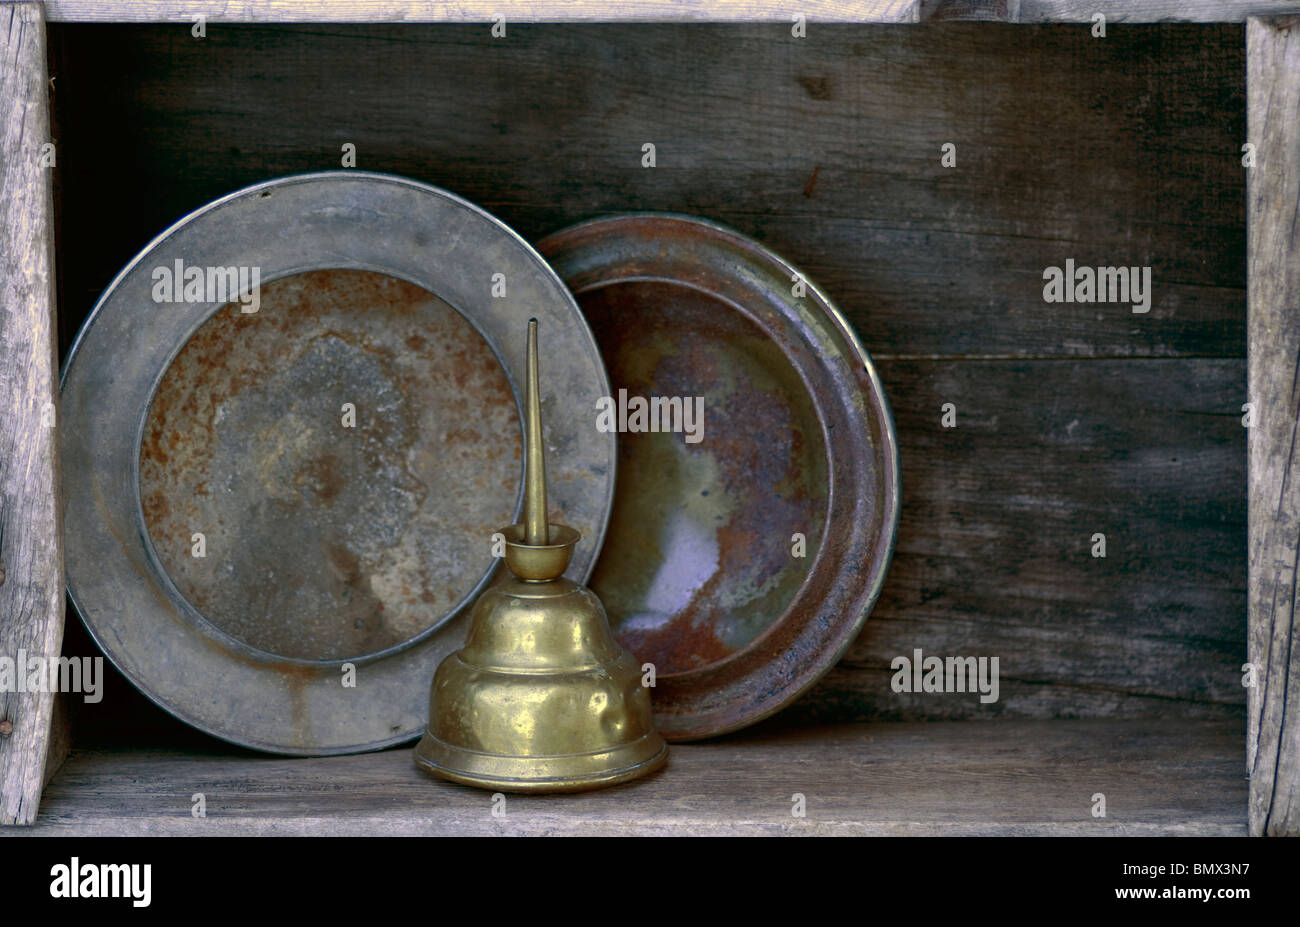 Spare parts for your old car. Rusted hubcaps and dented oil can on weathered wooden shelf. Stock Photo